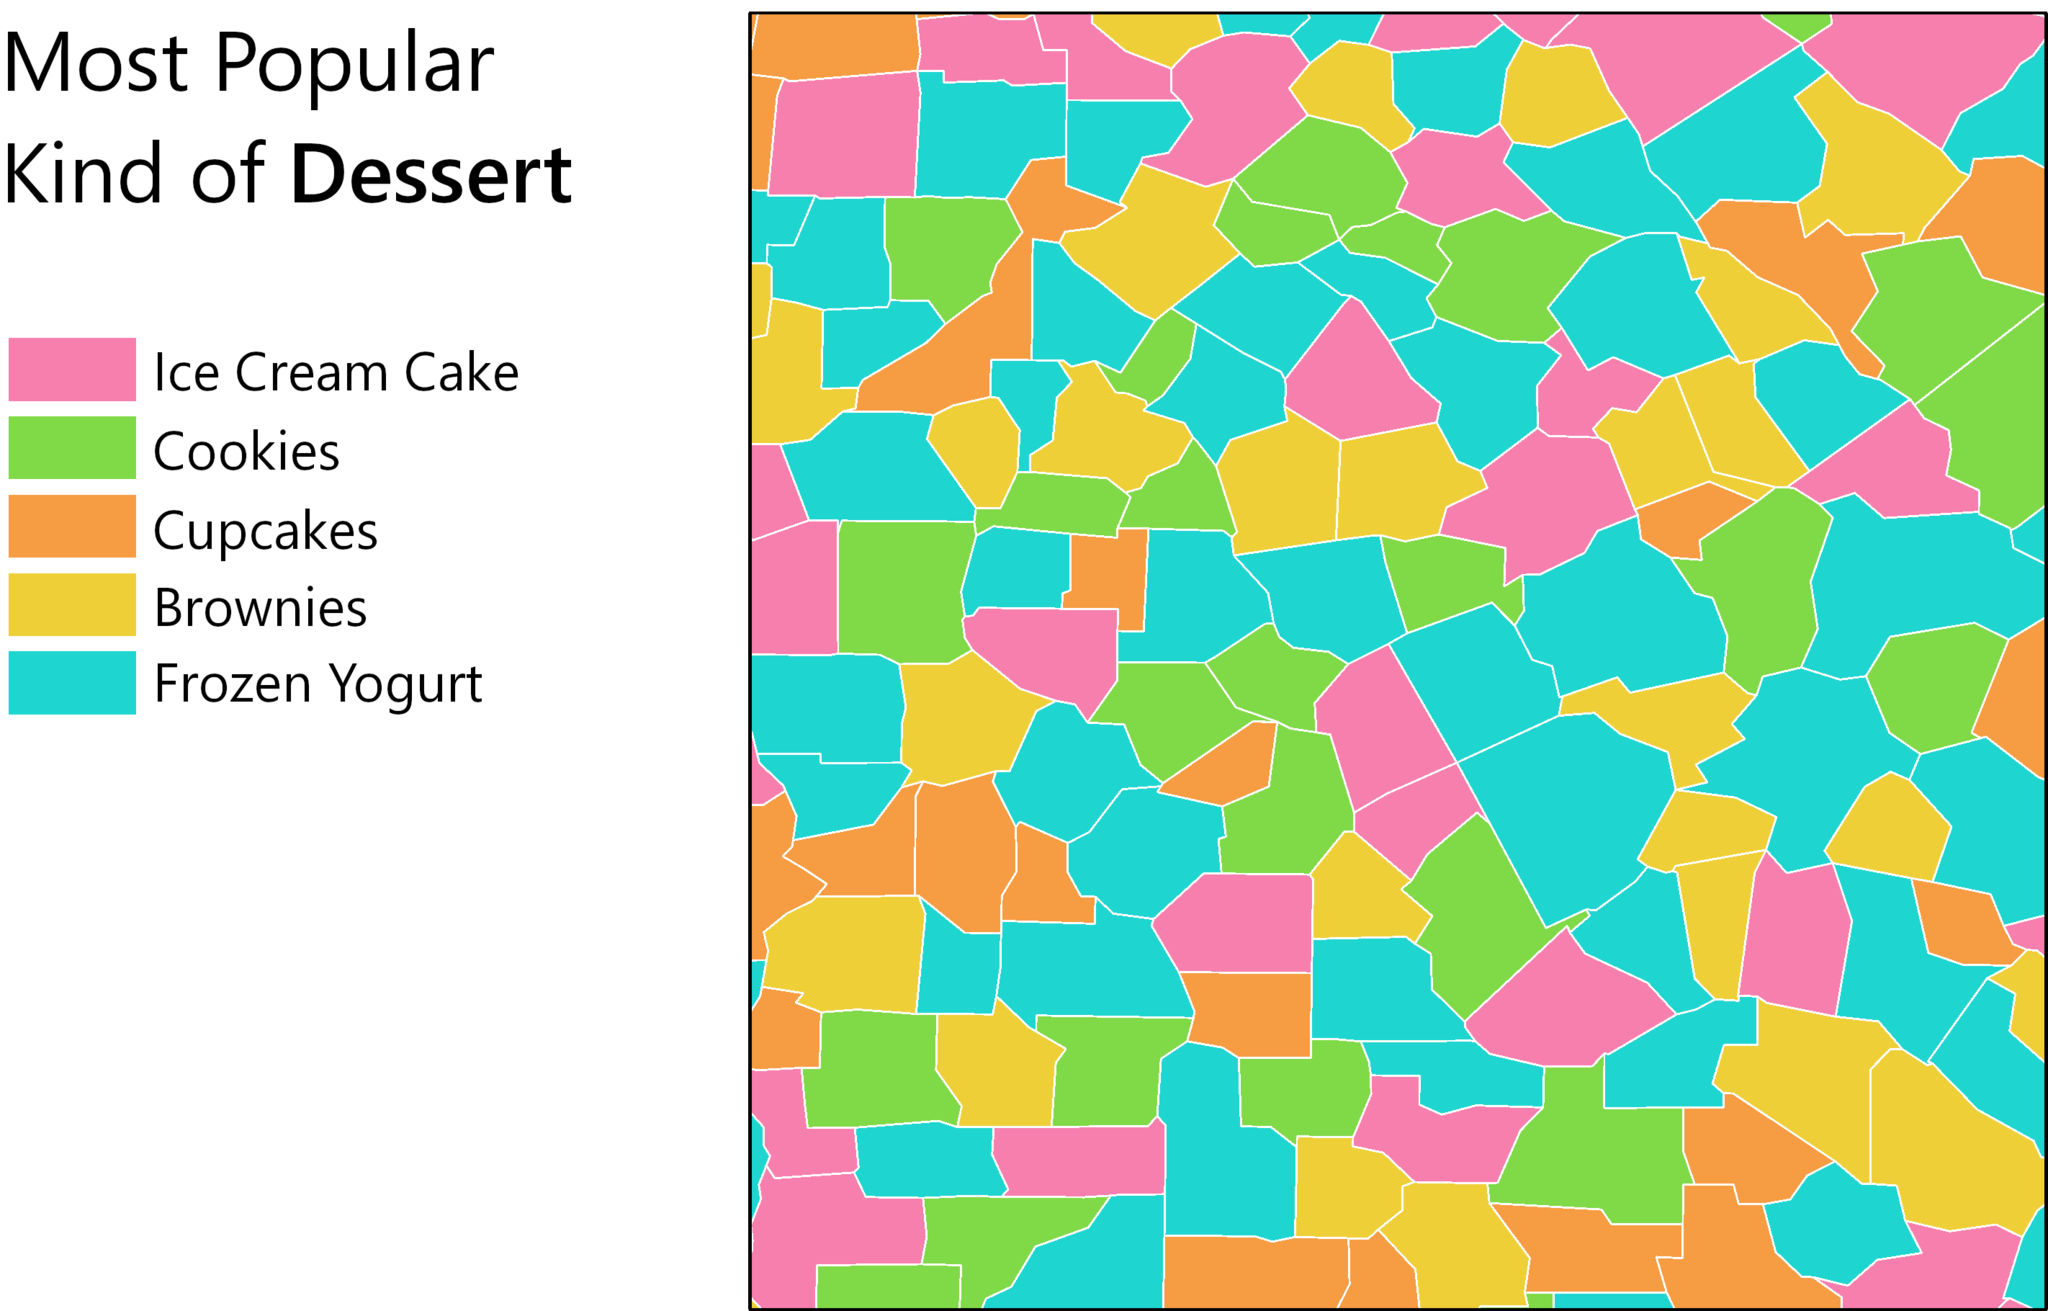 A chorochromatic map of Most Popular Kind of Dessert from US Census